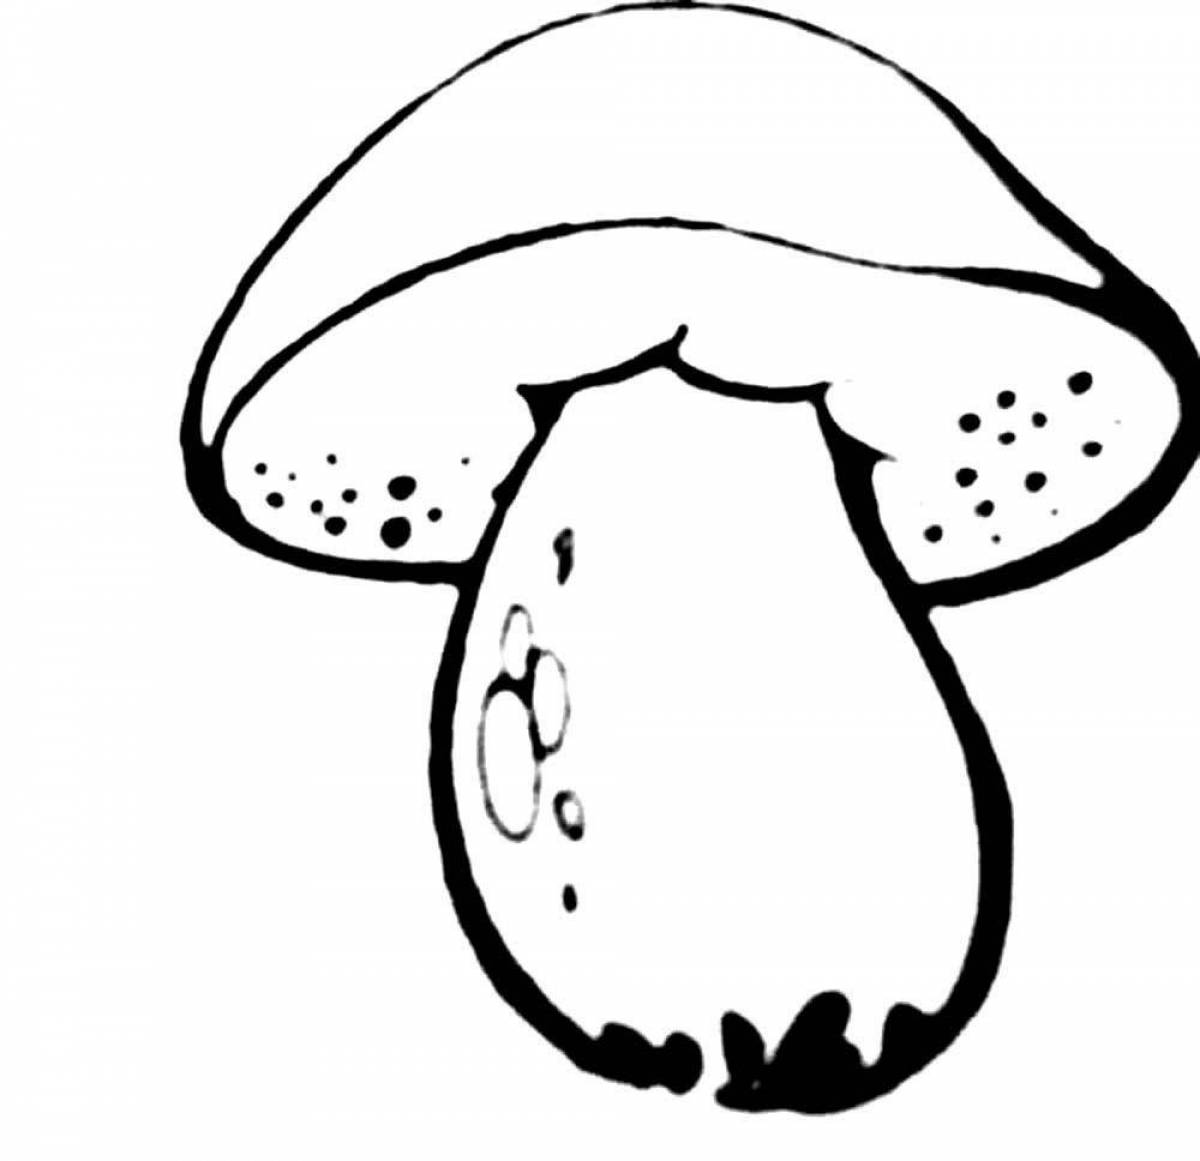 Gorgeous Mushroom coloring page